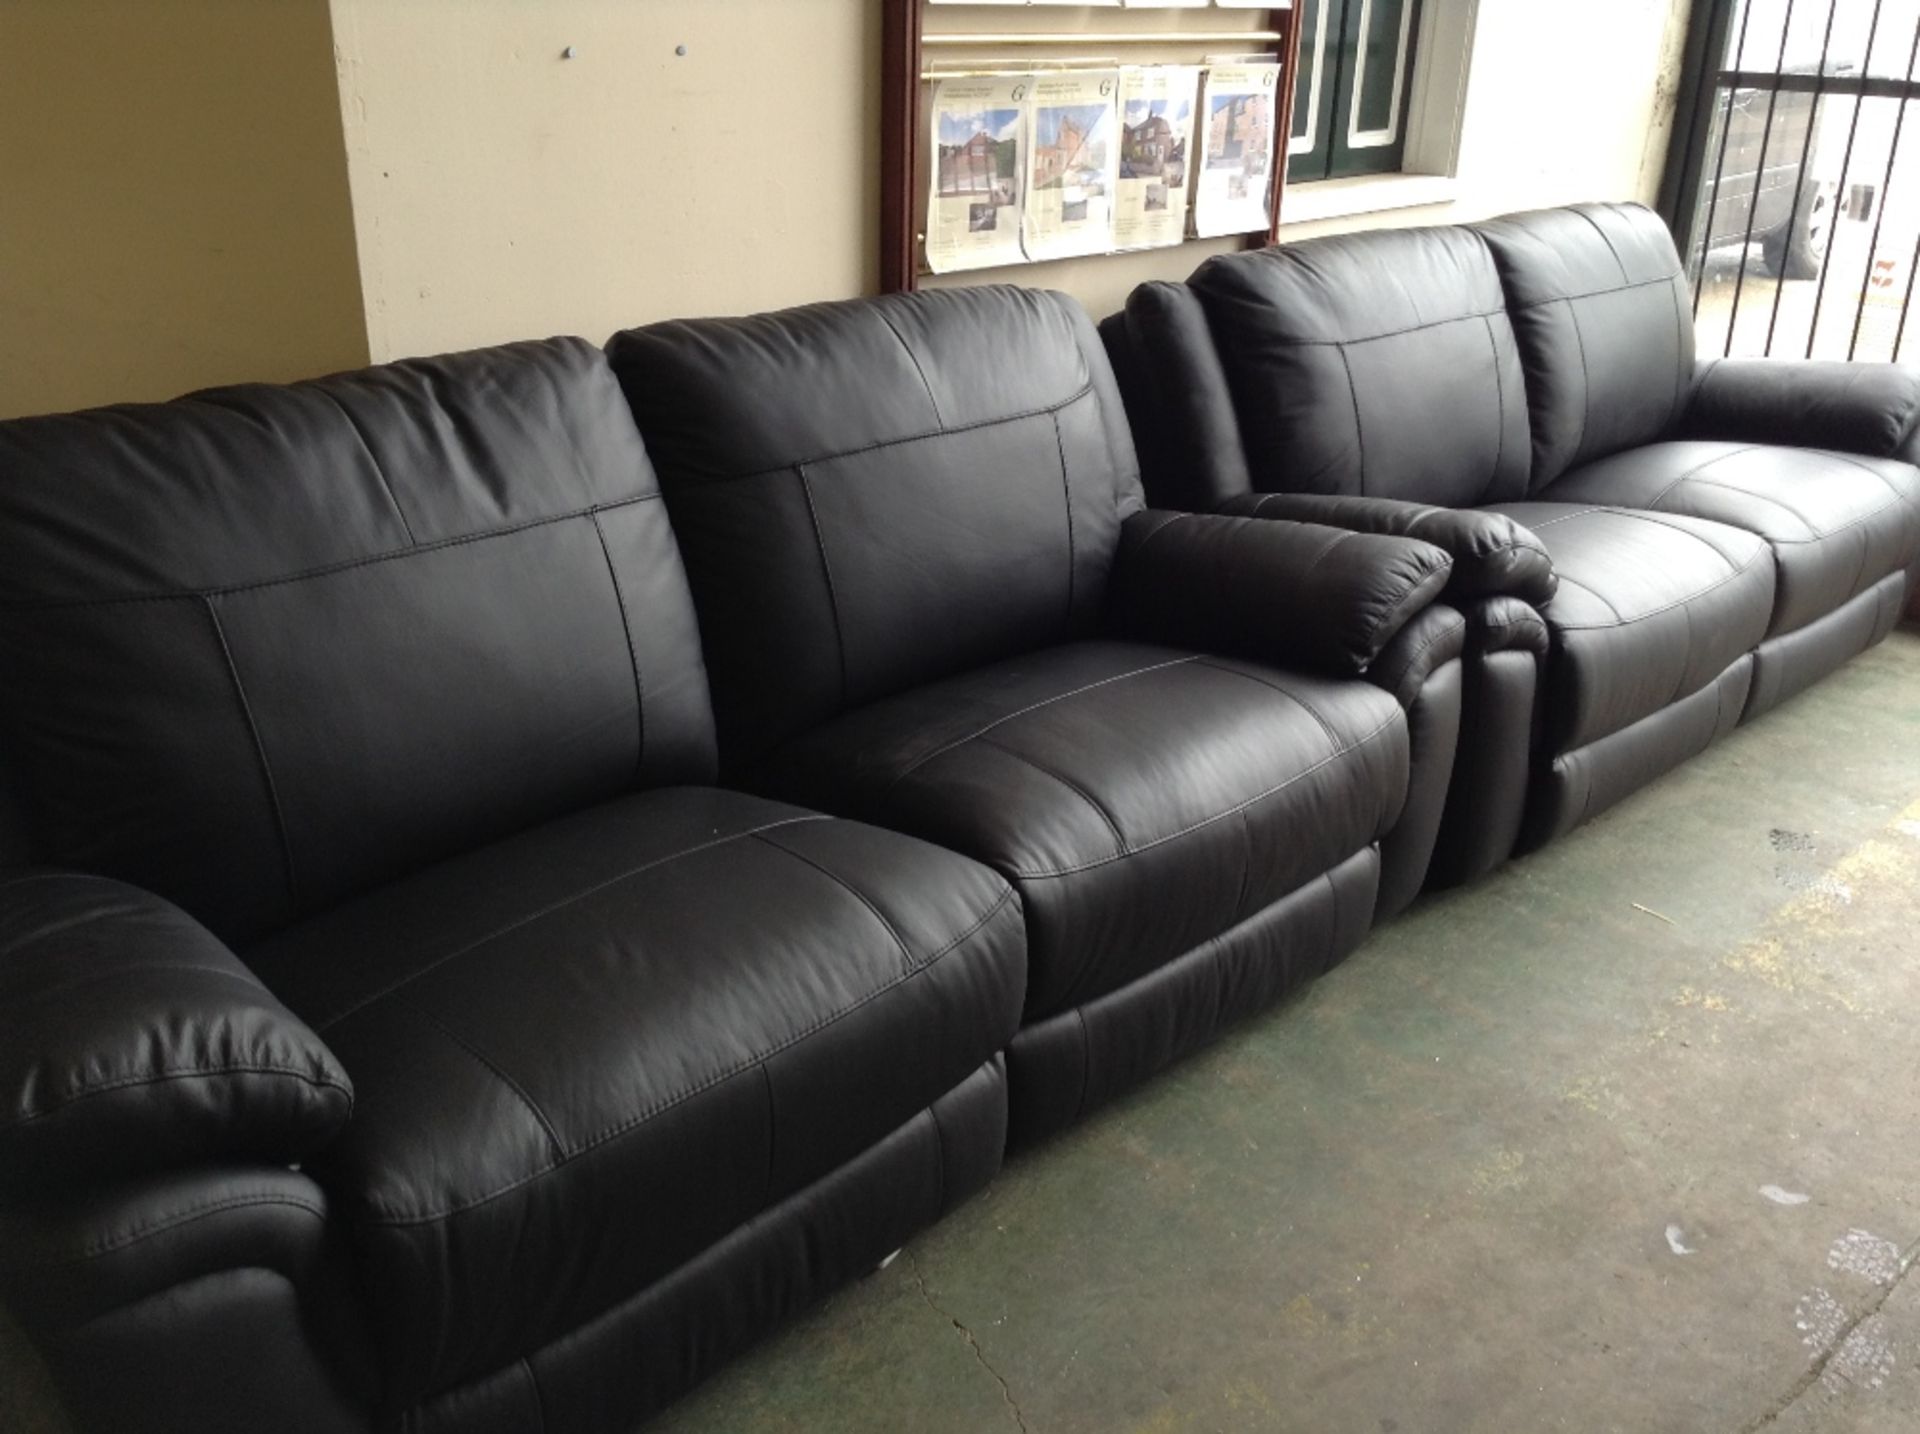 BLACK LEATHER MANUAL RECLINING 3 SEATER SOFA AND F